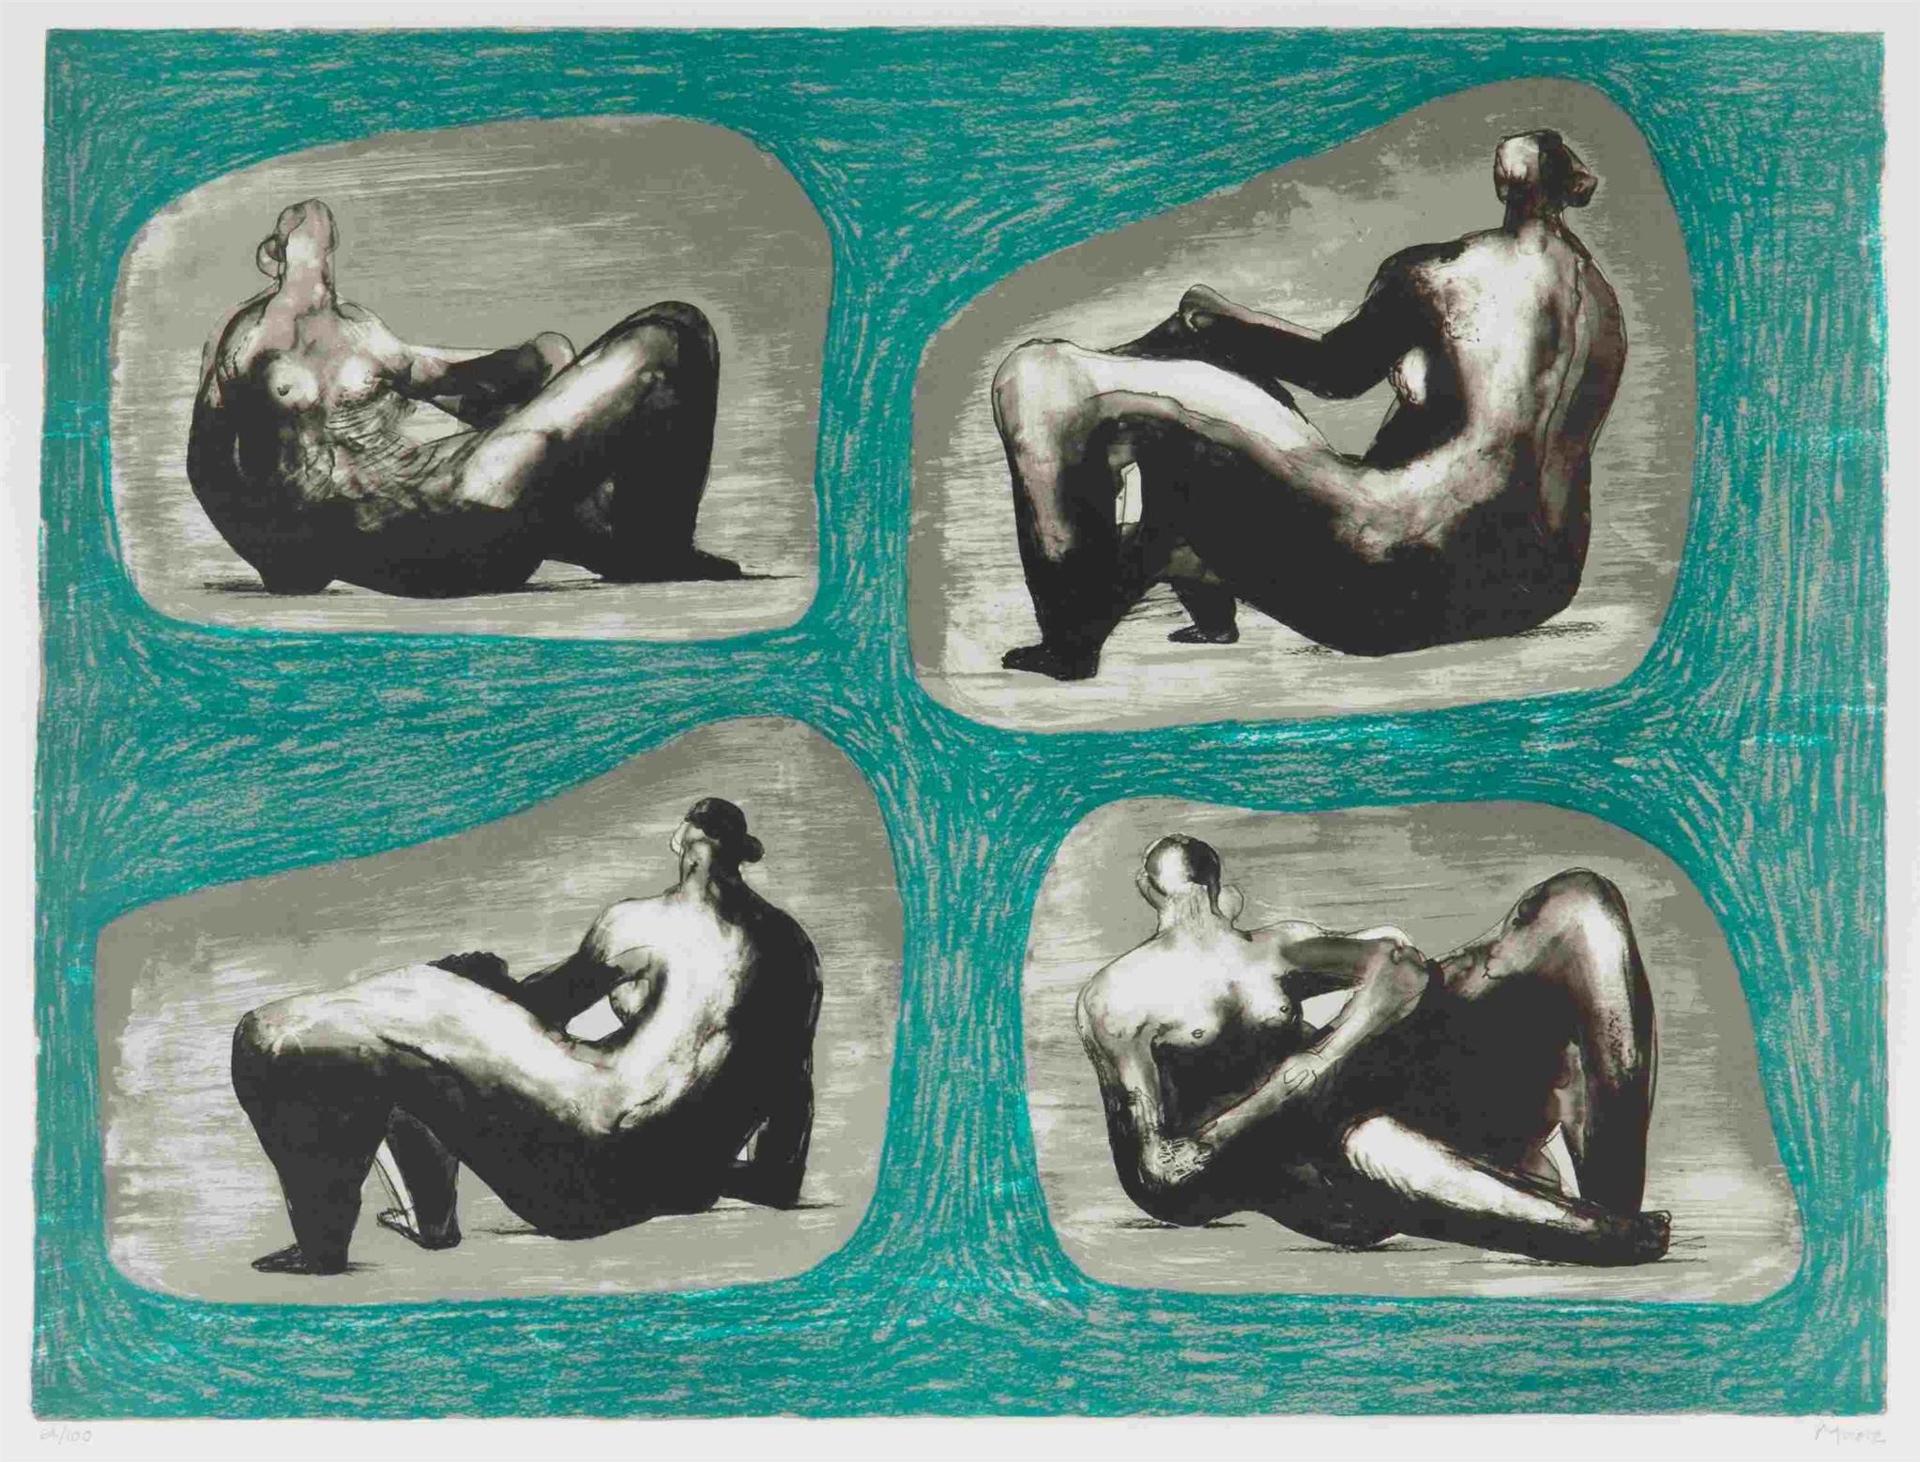 Henry Spencer Moore (1898-1986) - Four Reclining Figures, Caves (1974) [Cranmer, 335]